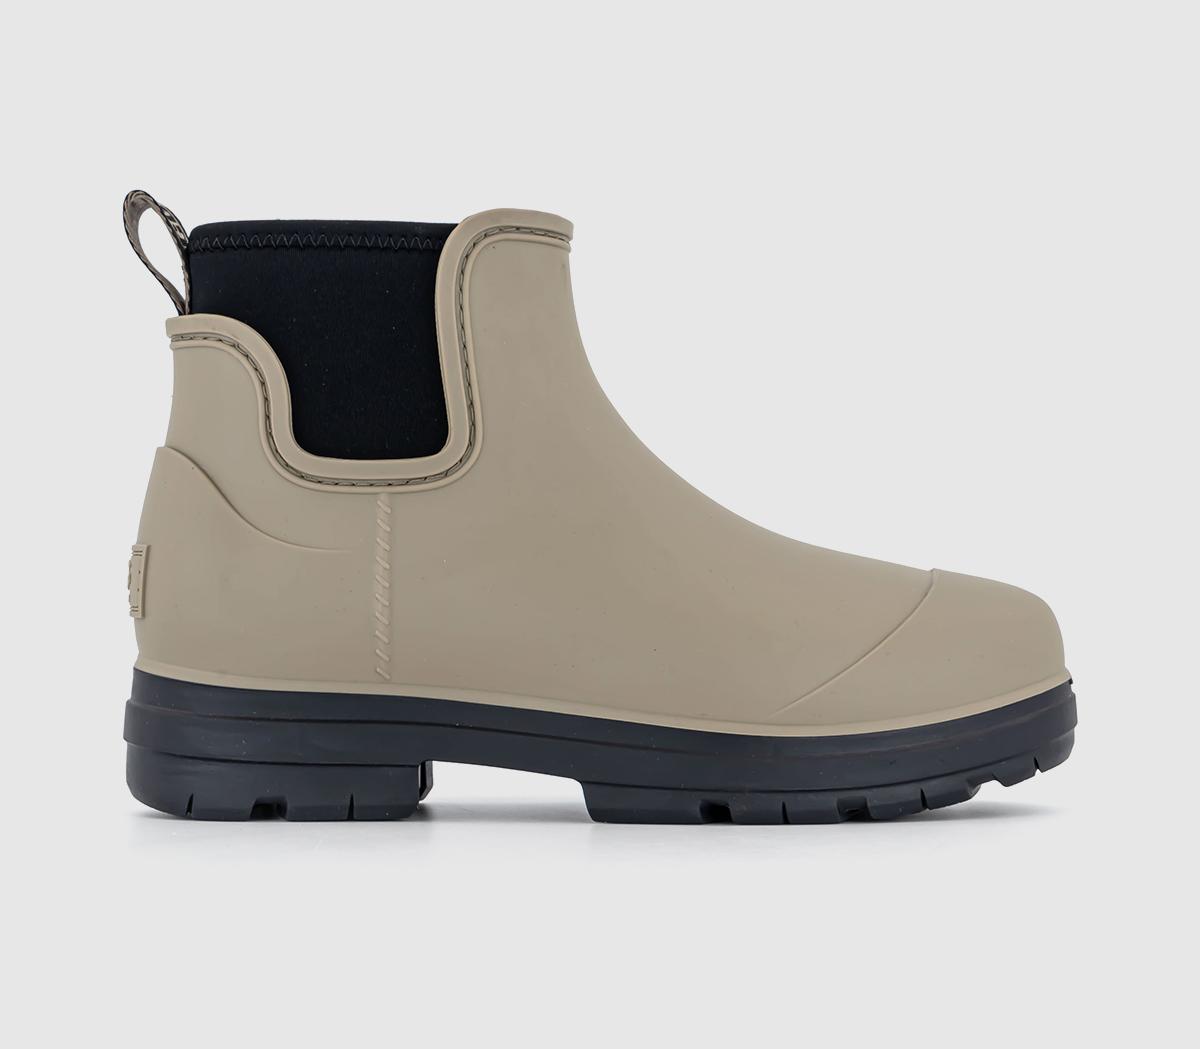 Droplet Rain Boots Taupe Natural